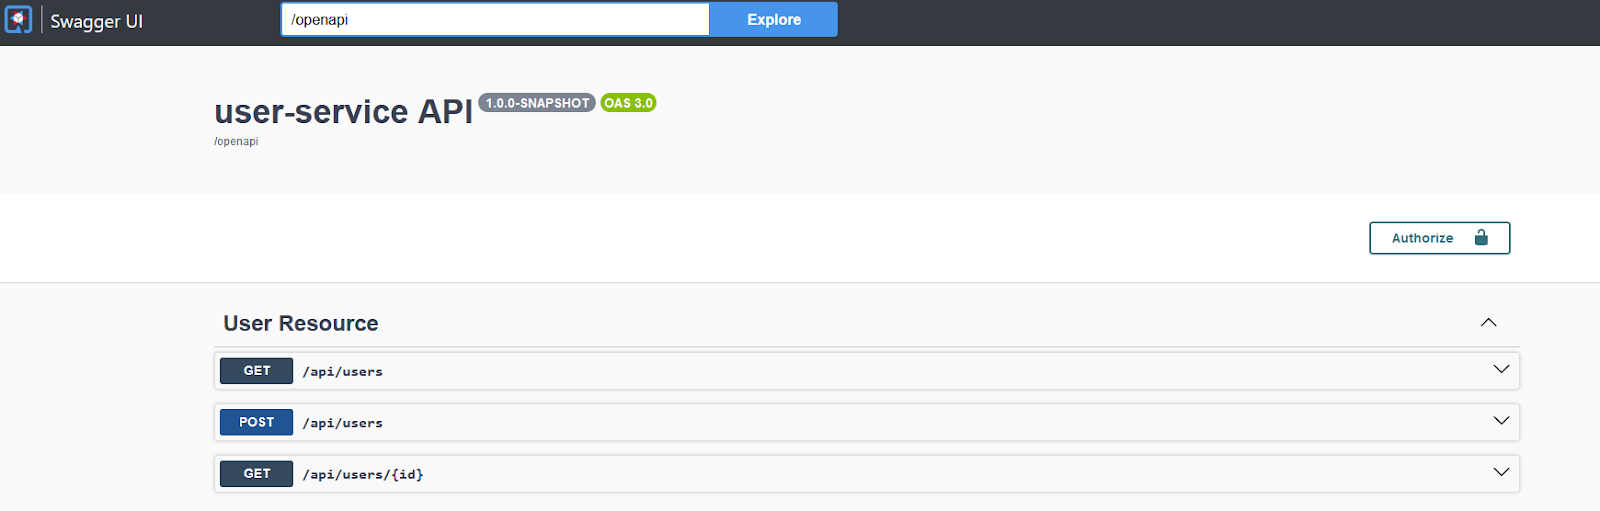 LocalHost open showing the Swagger UI. The page verifies the user-service API is functional.